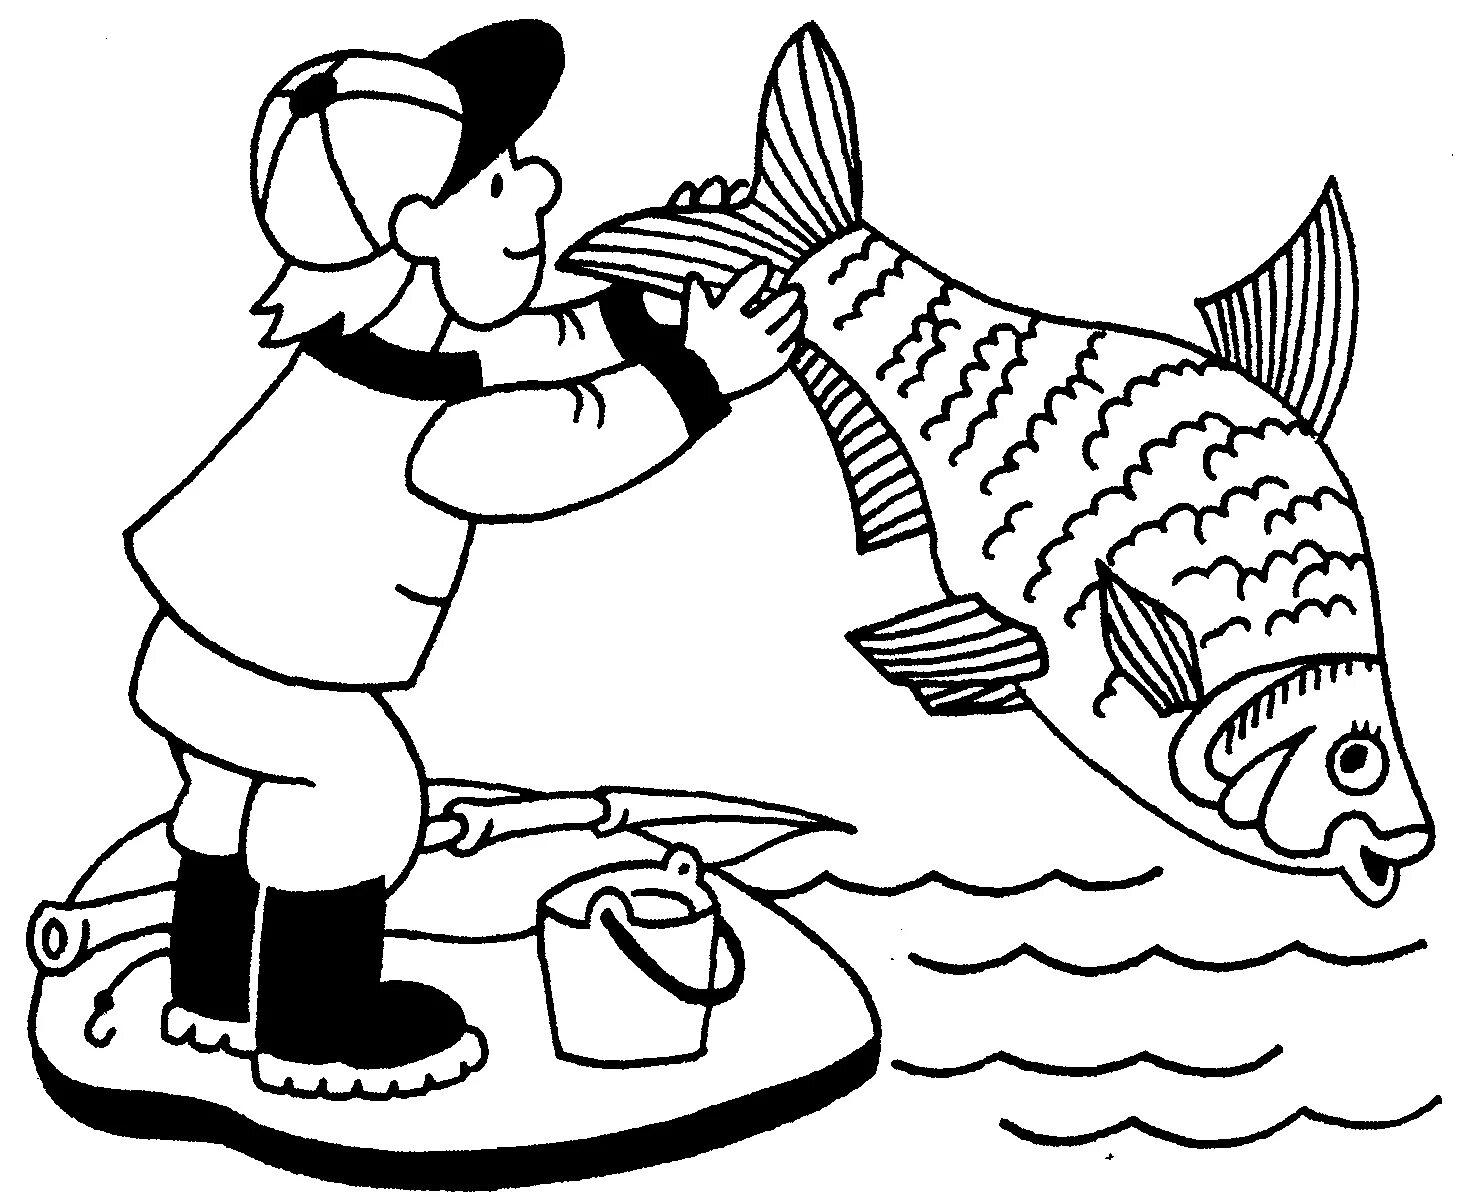 An extraordinary fisherman coloring for children